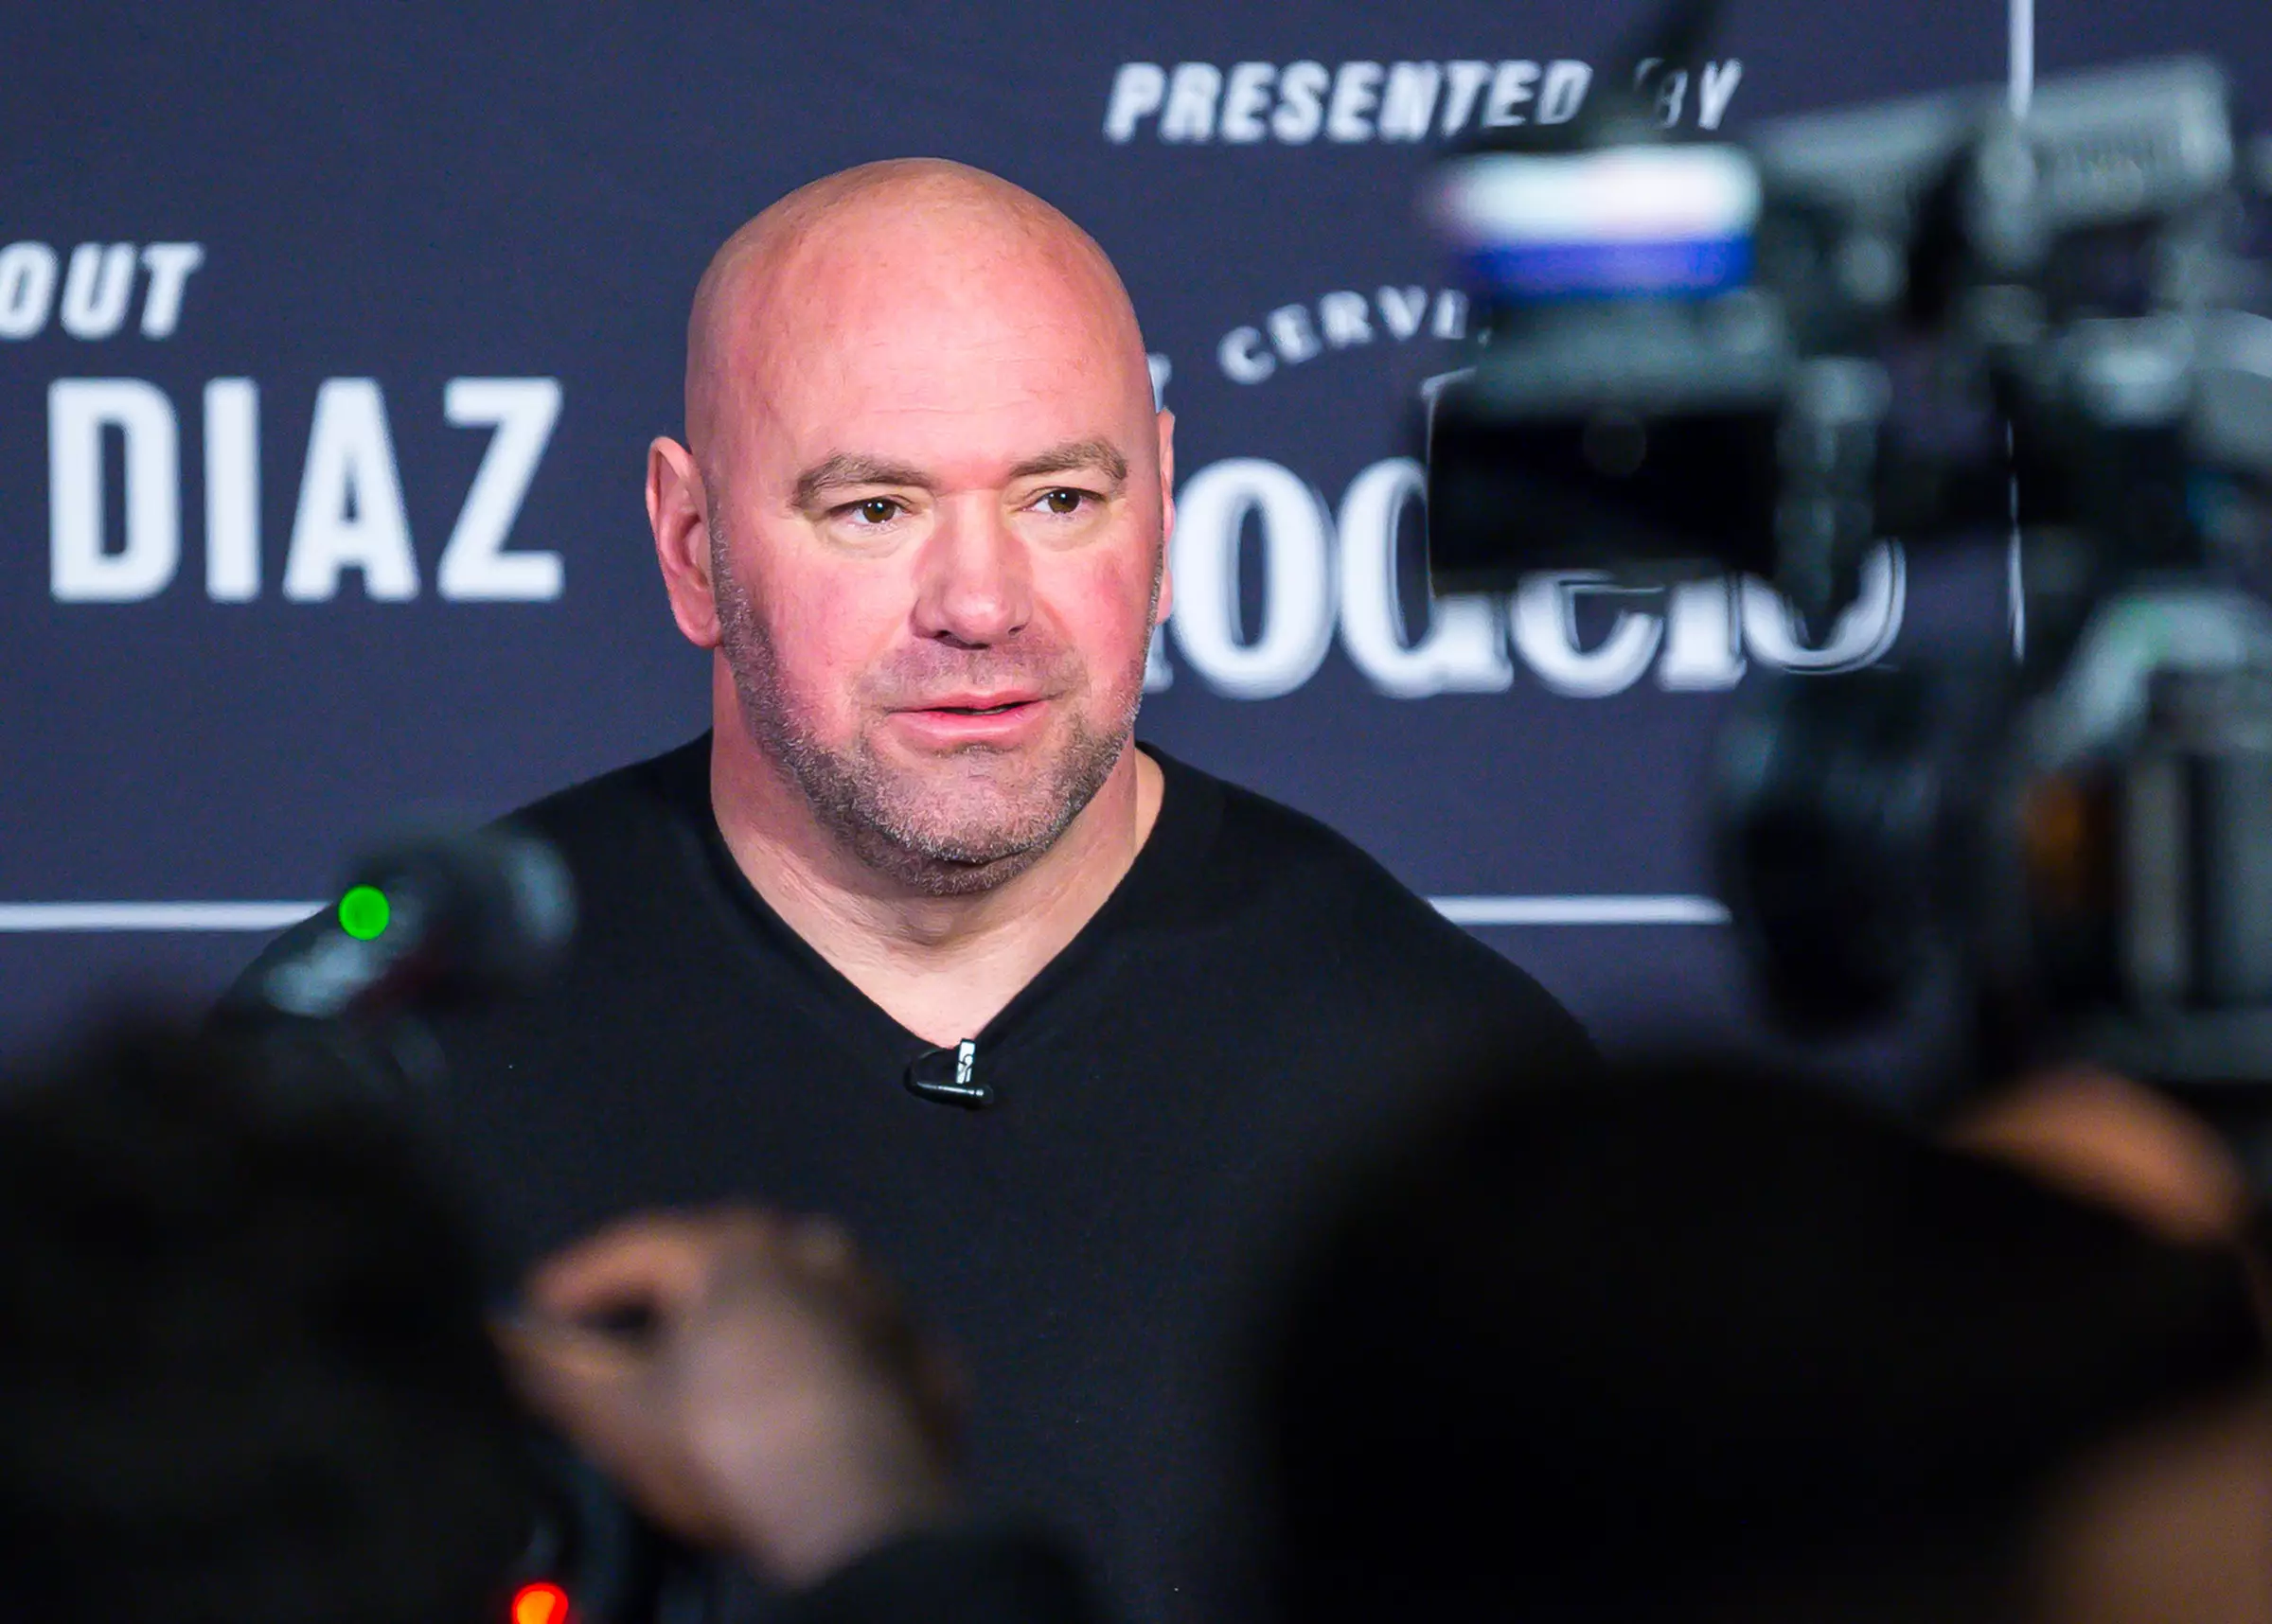 Dana White at UFC 244 over the weekend. (image